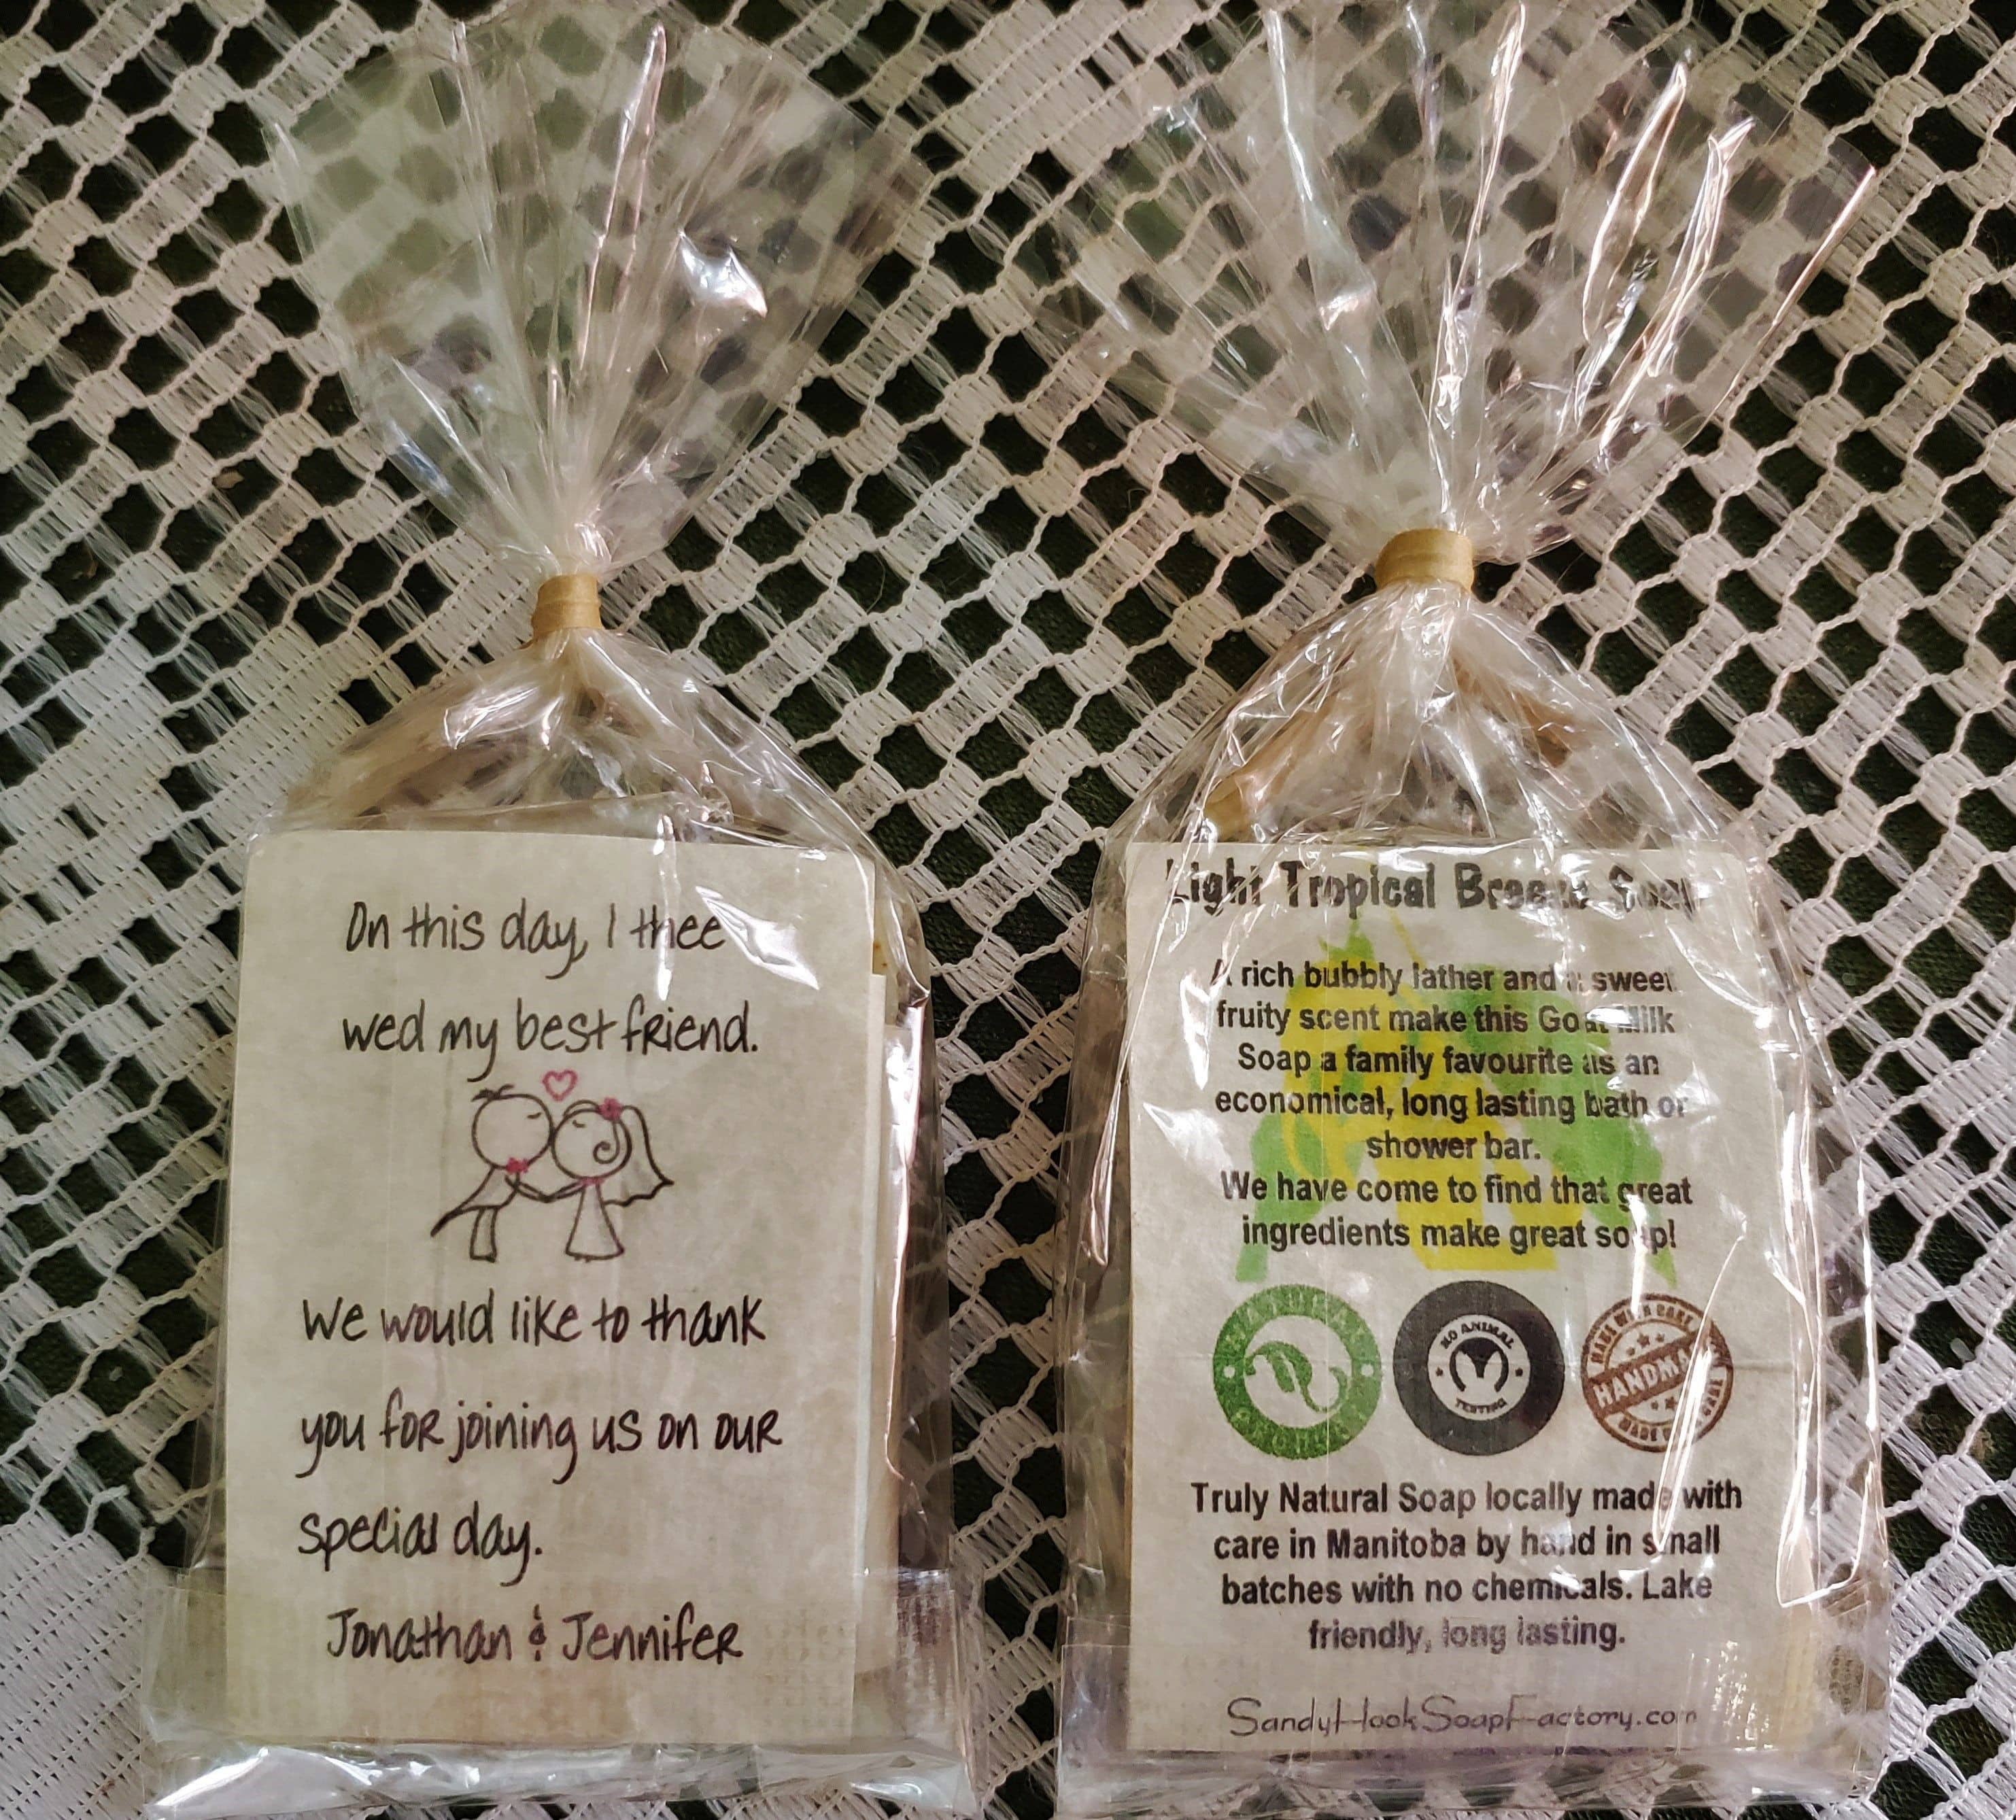 Our all natural soap favours are made in Canada in small batches from quality ingredients.  This is an inexpensive but attractive, useful guest gift.